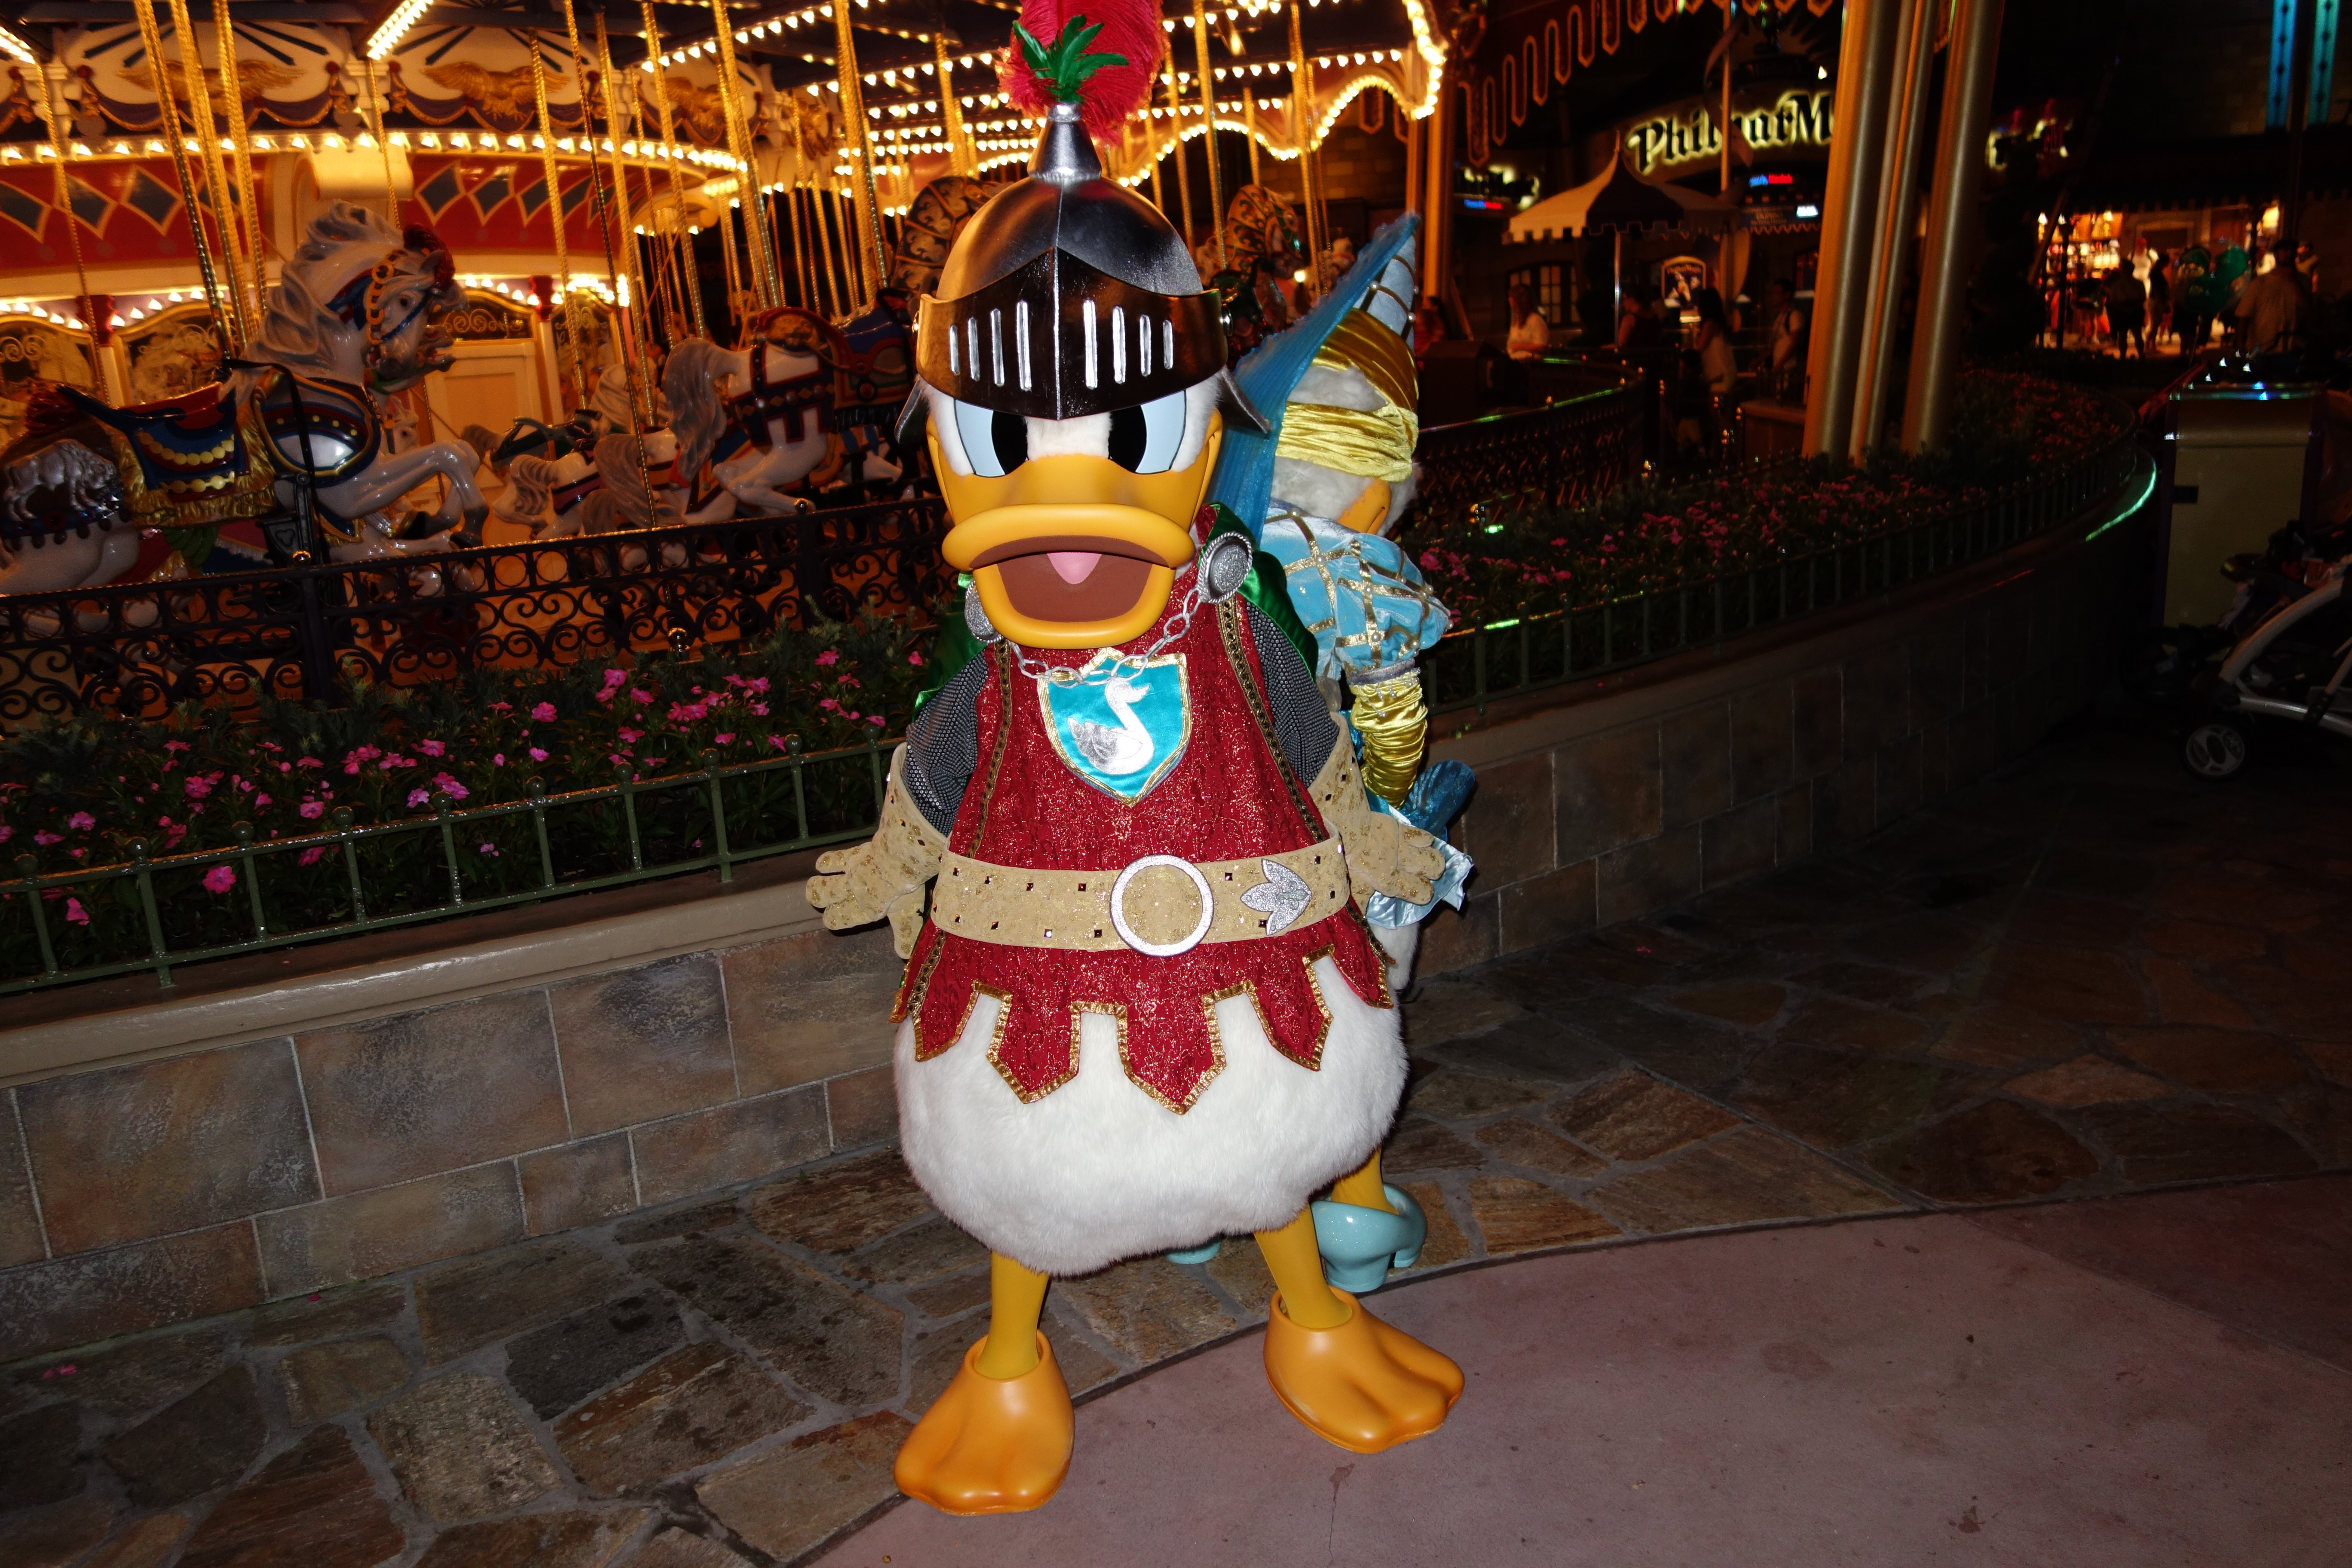 CM told Daisy she needed to fix her dress and of course the valiant and chivalrous Donald came to the rescue!